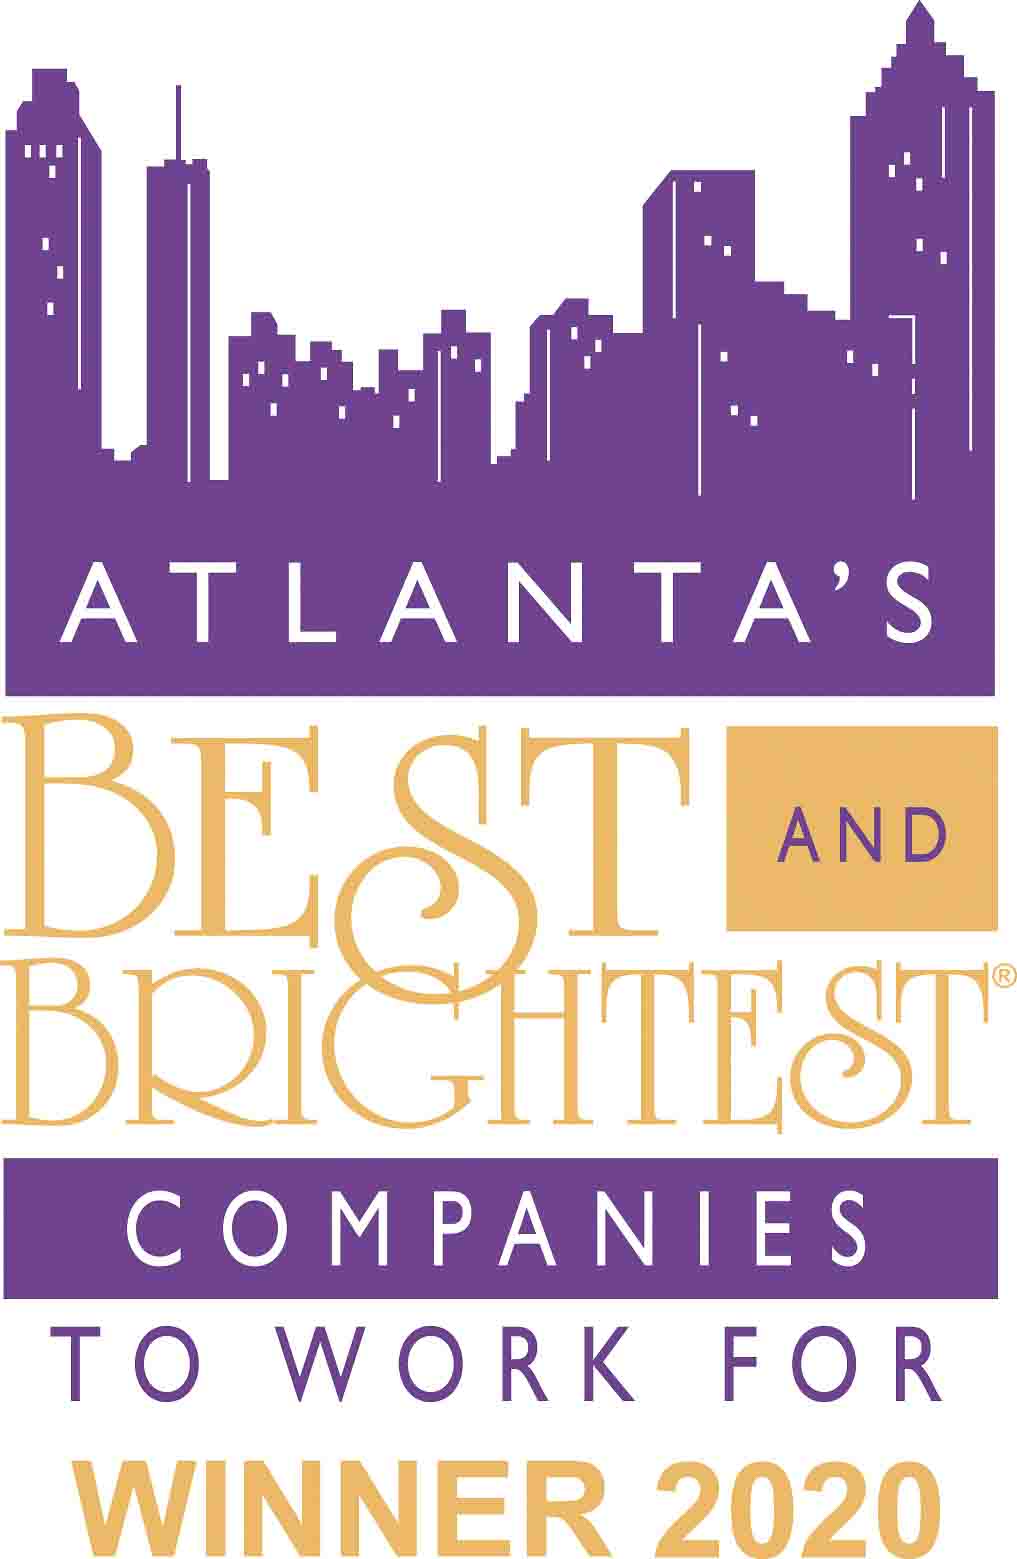 Rural Sourcing Named One of the Best and Brightest to Work for in Atlanta